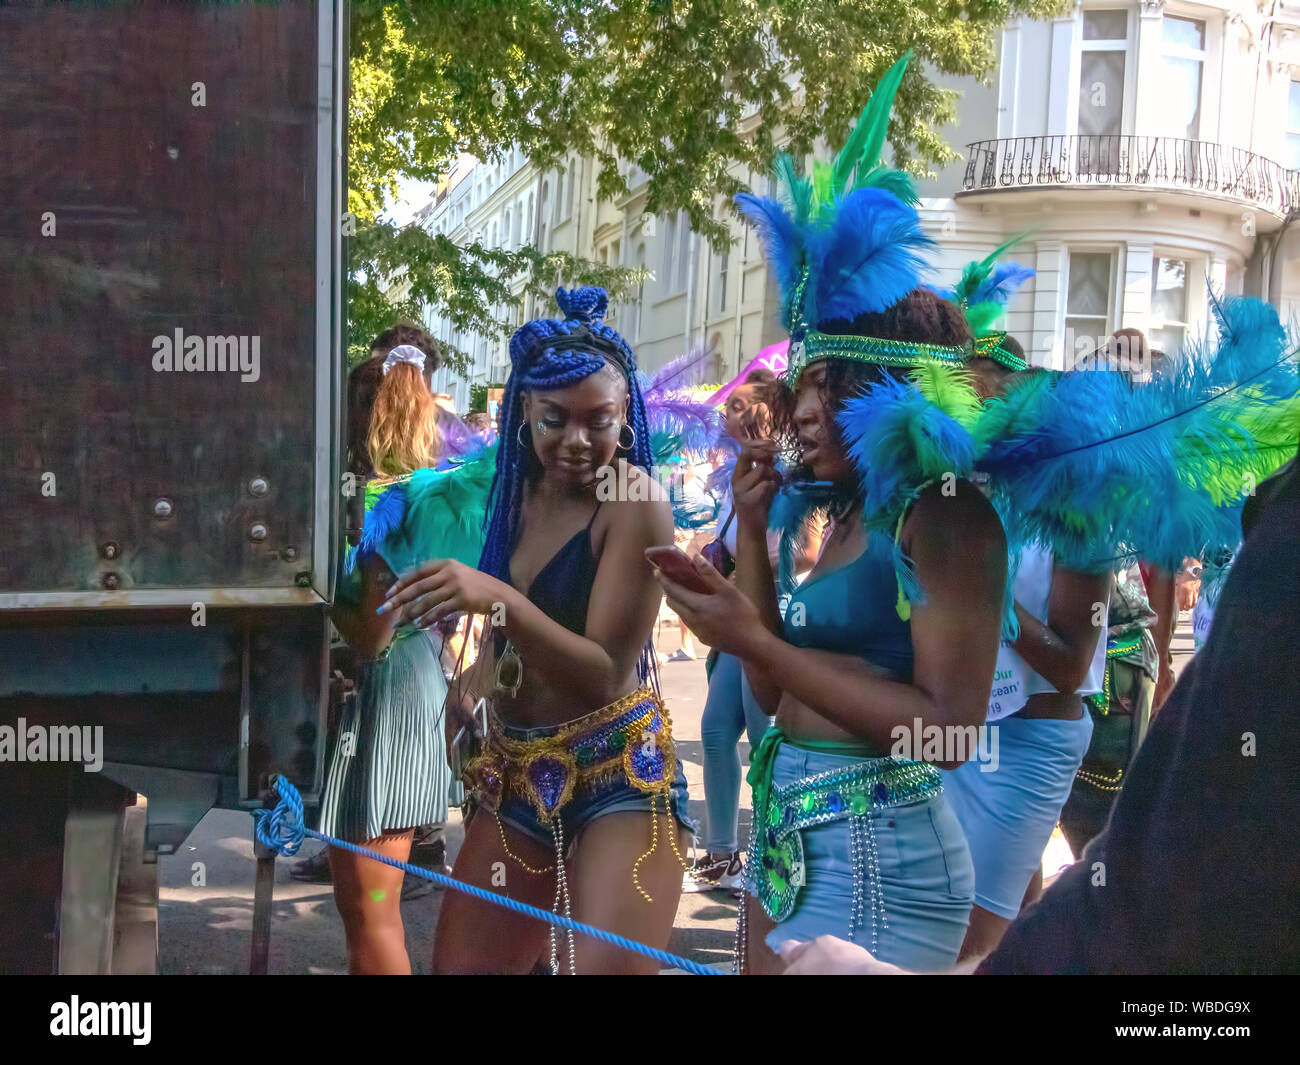 Masqueraders behind a truck during the celebration.The main events of Notting Hill Carnival 2019 got underway, with over a million revellers hitting the streets of West London, amongst floats, masqueraders, steel bands, and sound systems. Stock Photo